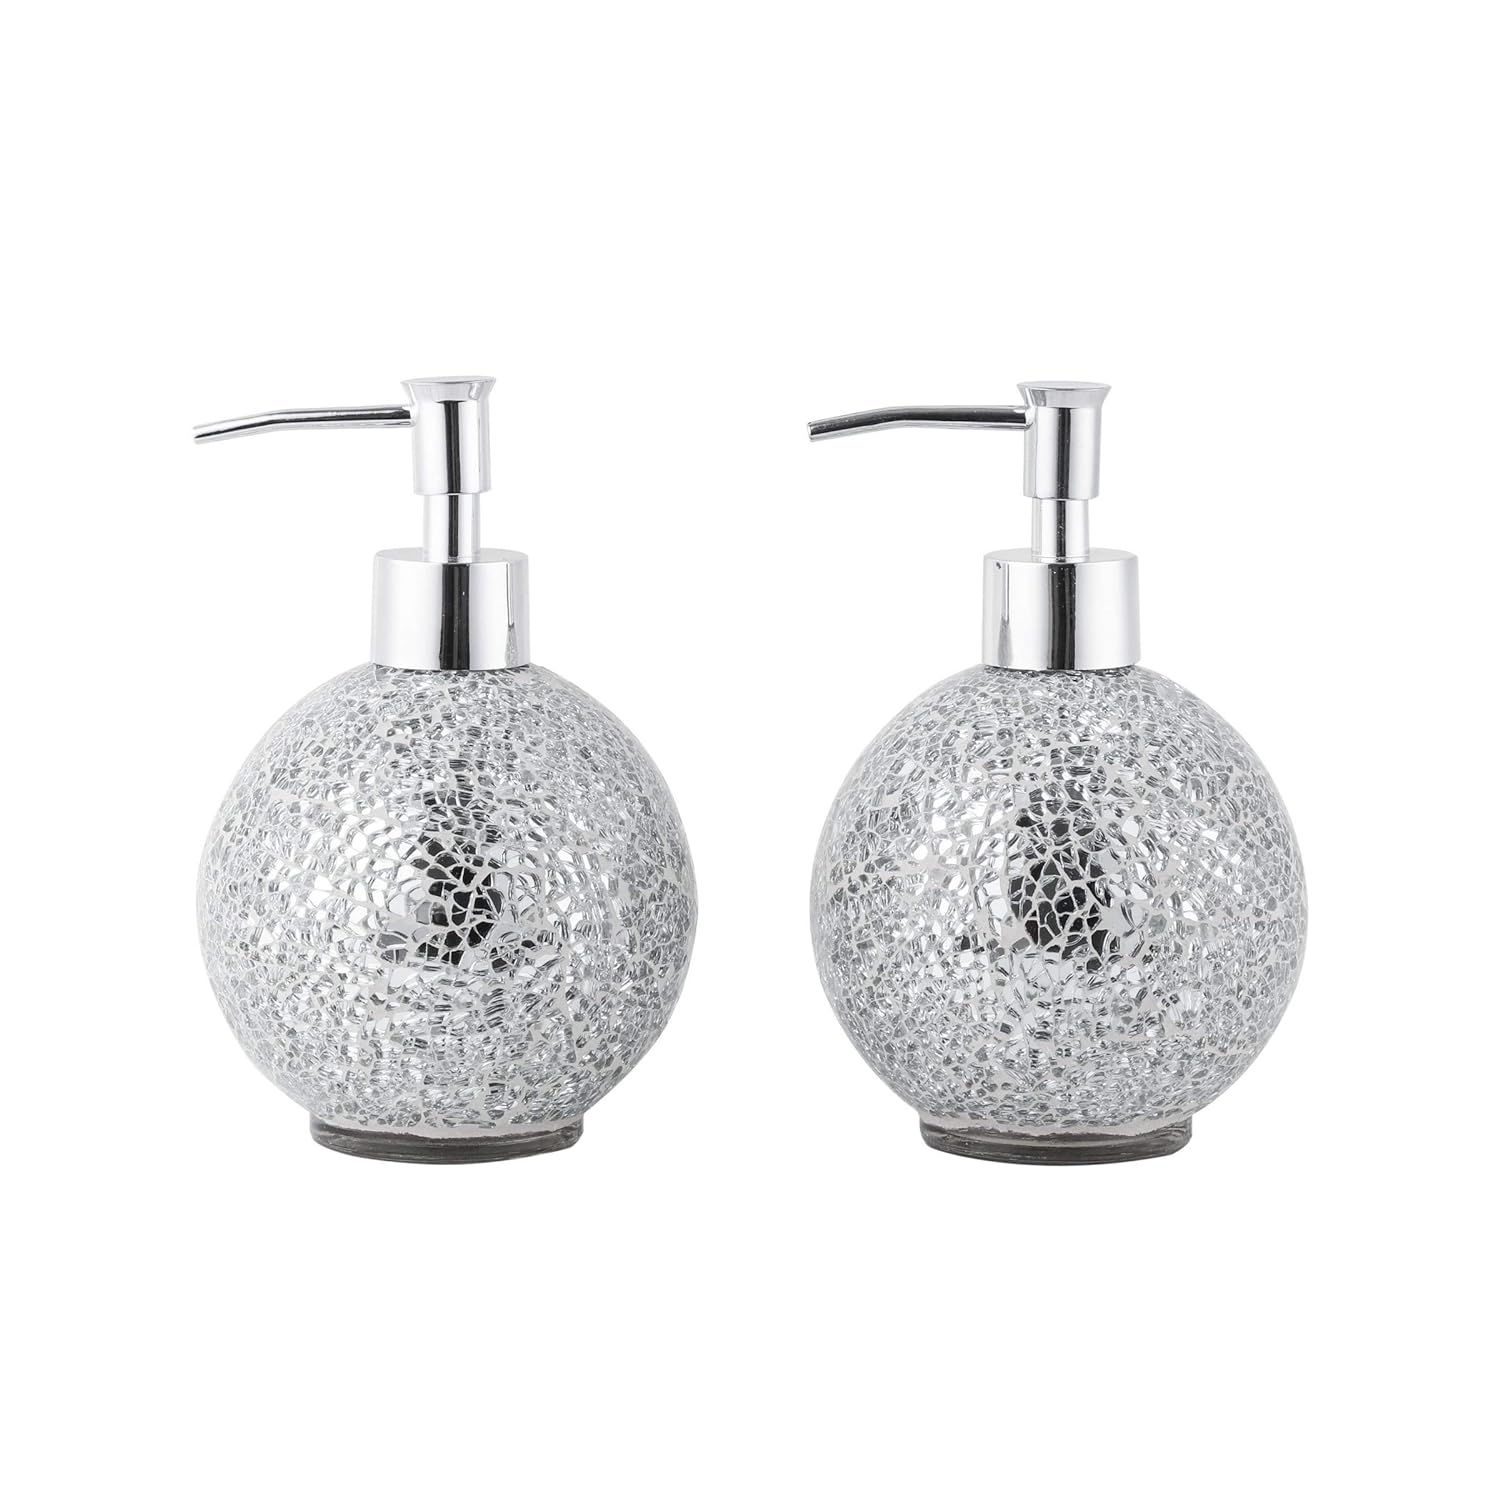 WHOLE HOUSEWARES | Glass Mosaic Hand Soap Dispenser for Bathroom | Lotion Bottle for Kitchen, Bathroom with Chrome Plated Plastic Pump |14 Ounce Set of 2 (Silver)